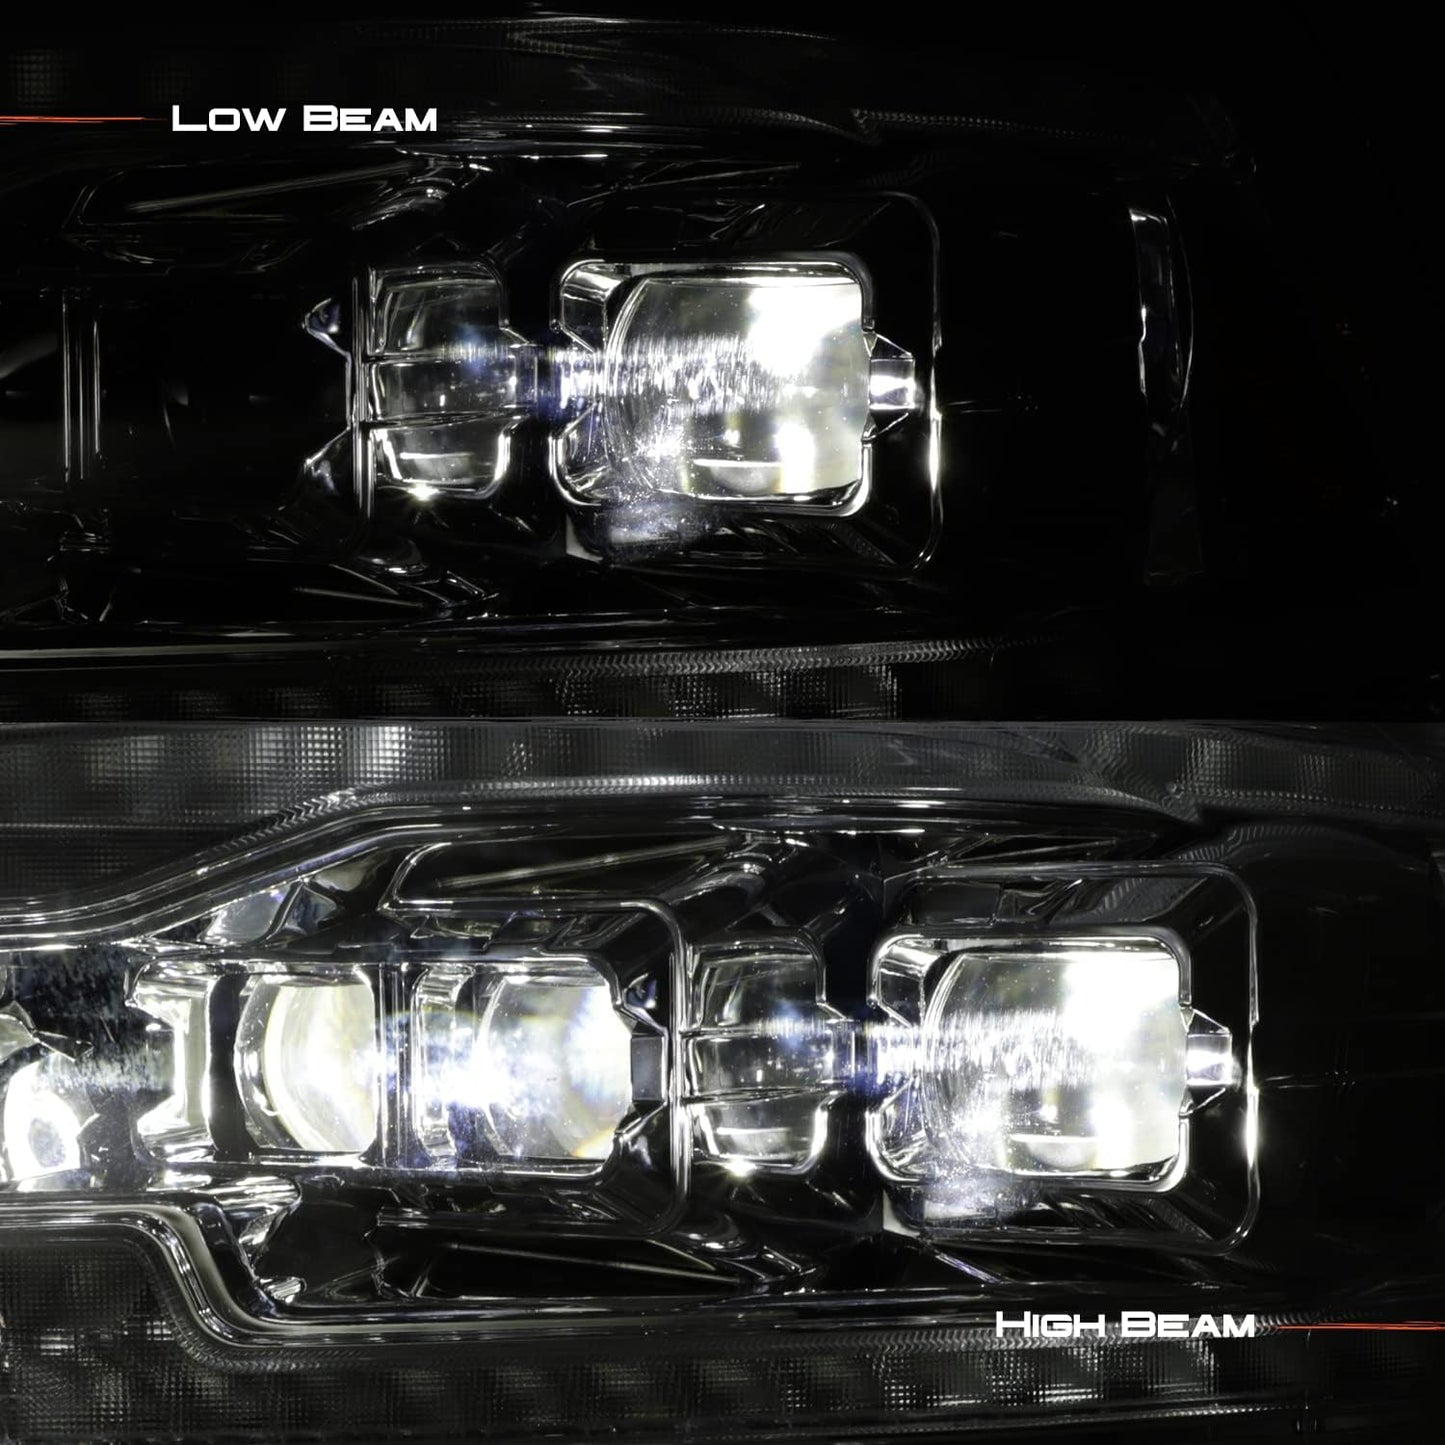 [Factory Upgrade] For 09-18 Dodge Ram 1500 2500 3500 LED DRL Headlights With Light bulbs